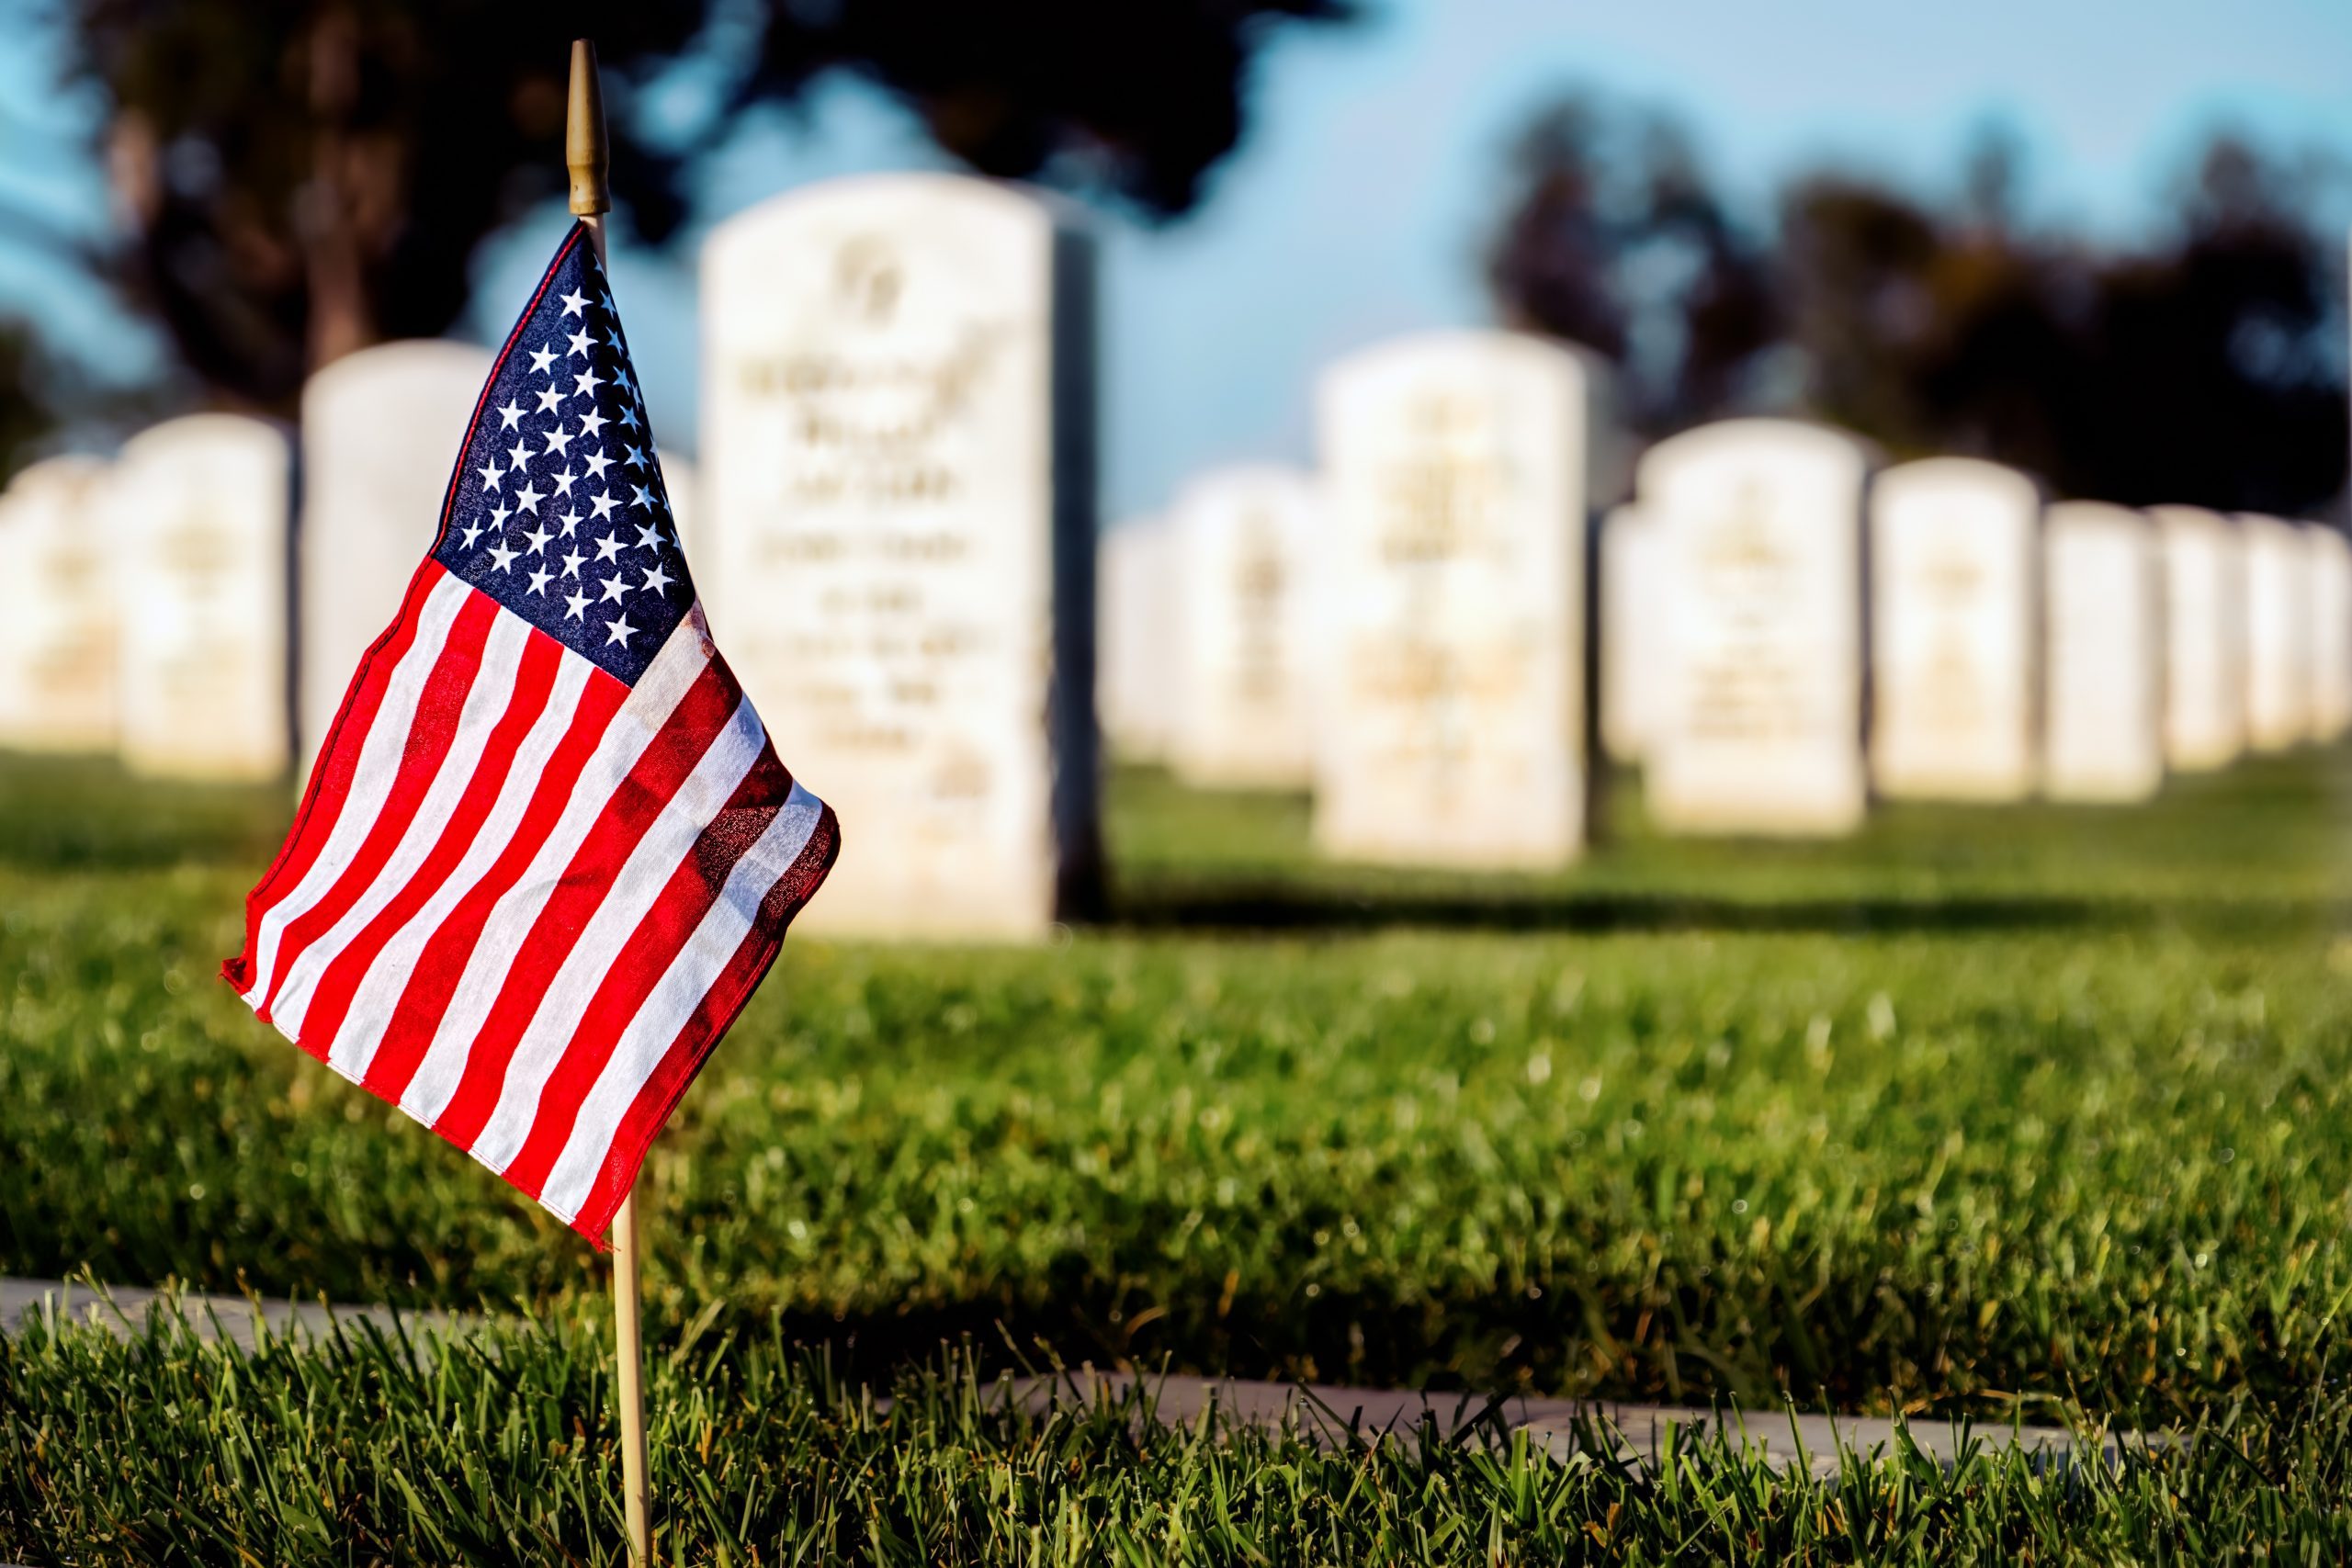 American flag in cemetery